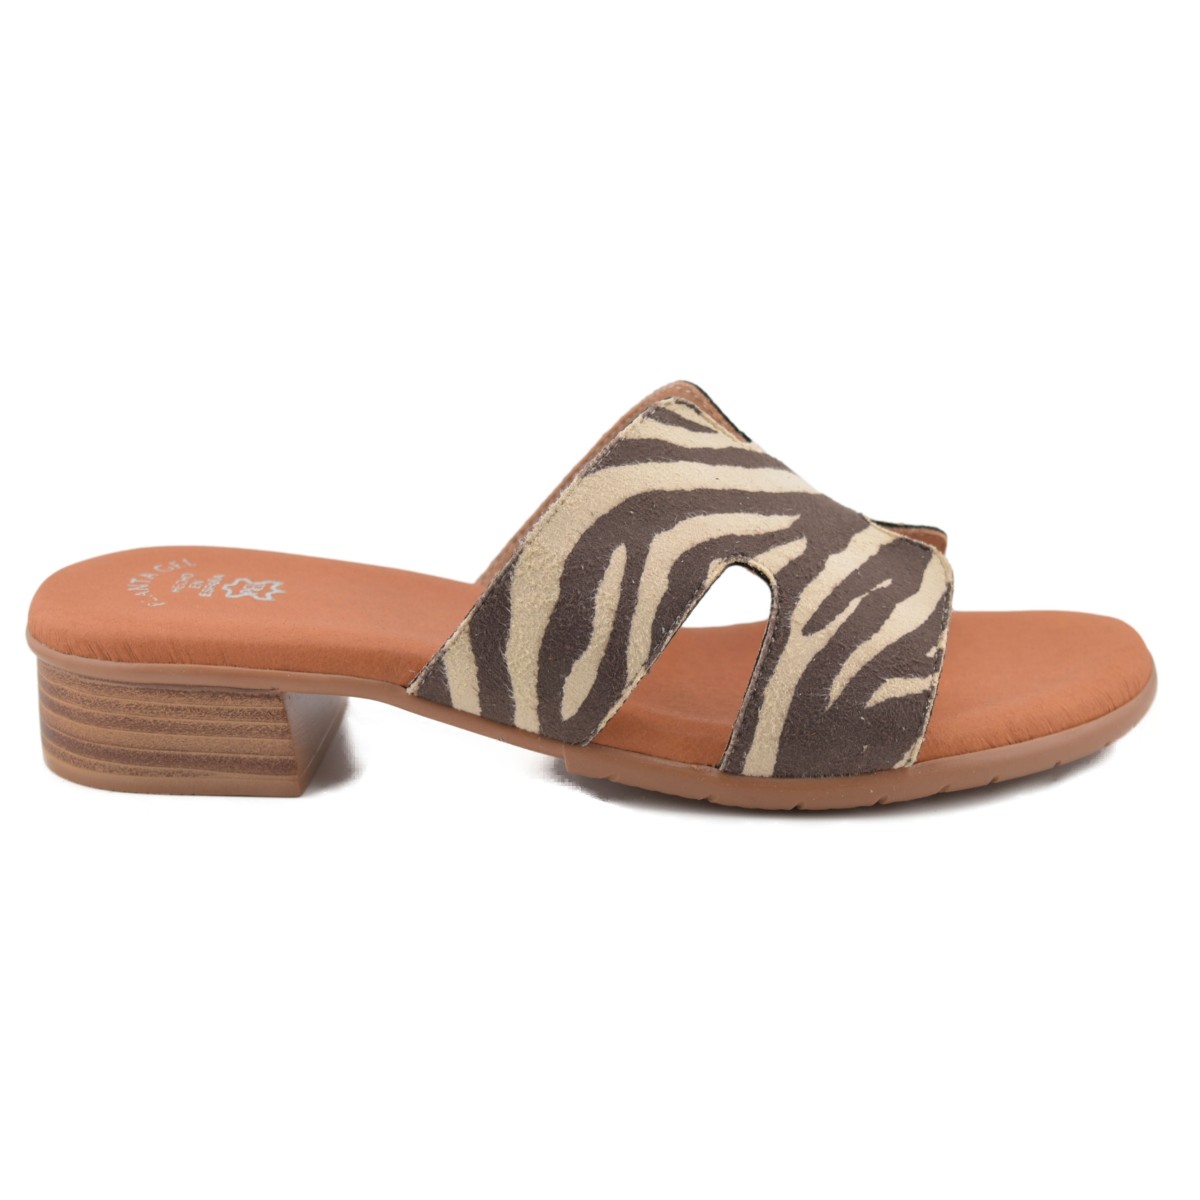 Leather animal print sandals with heel by CBP